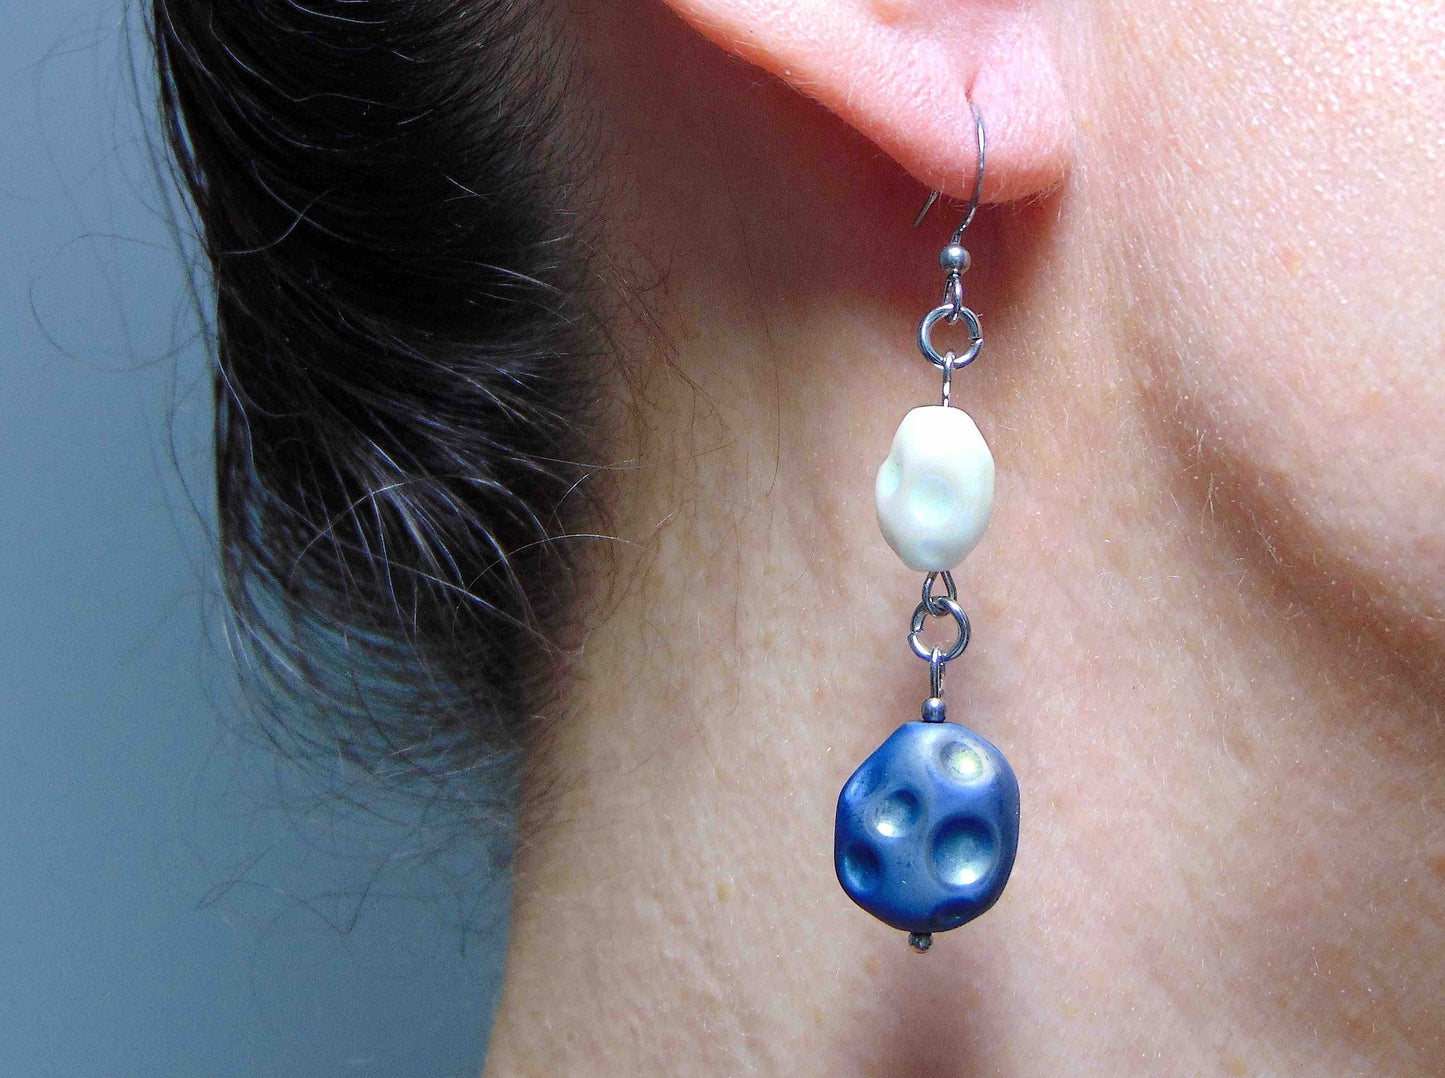 Long earrings with matte indigo blue and iridescent white vintage glass craters beads, stainless steel hooks